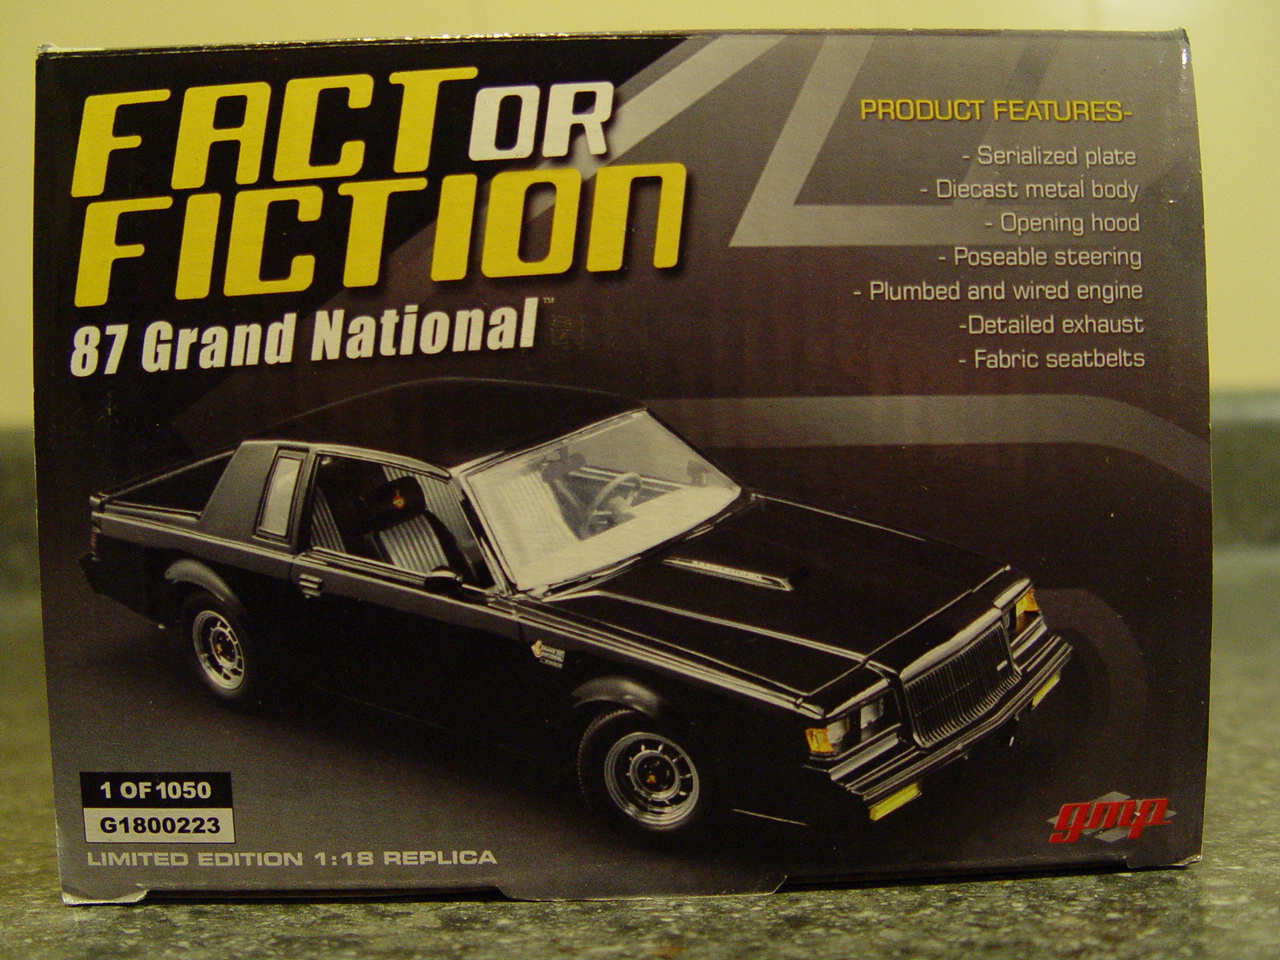 1:18 Scale GMP G1800223 Fact or Fiction 87 Grand National